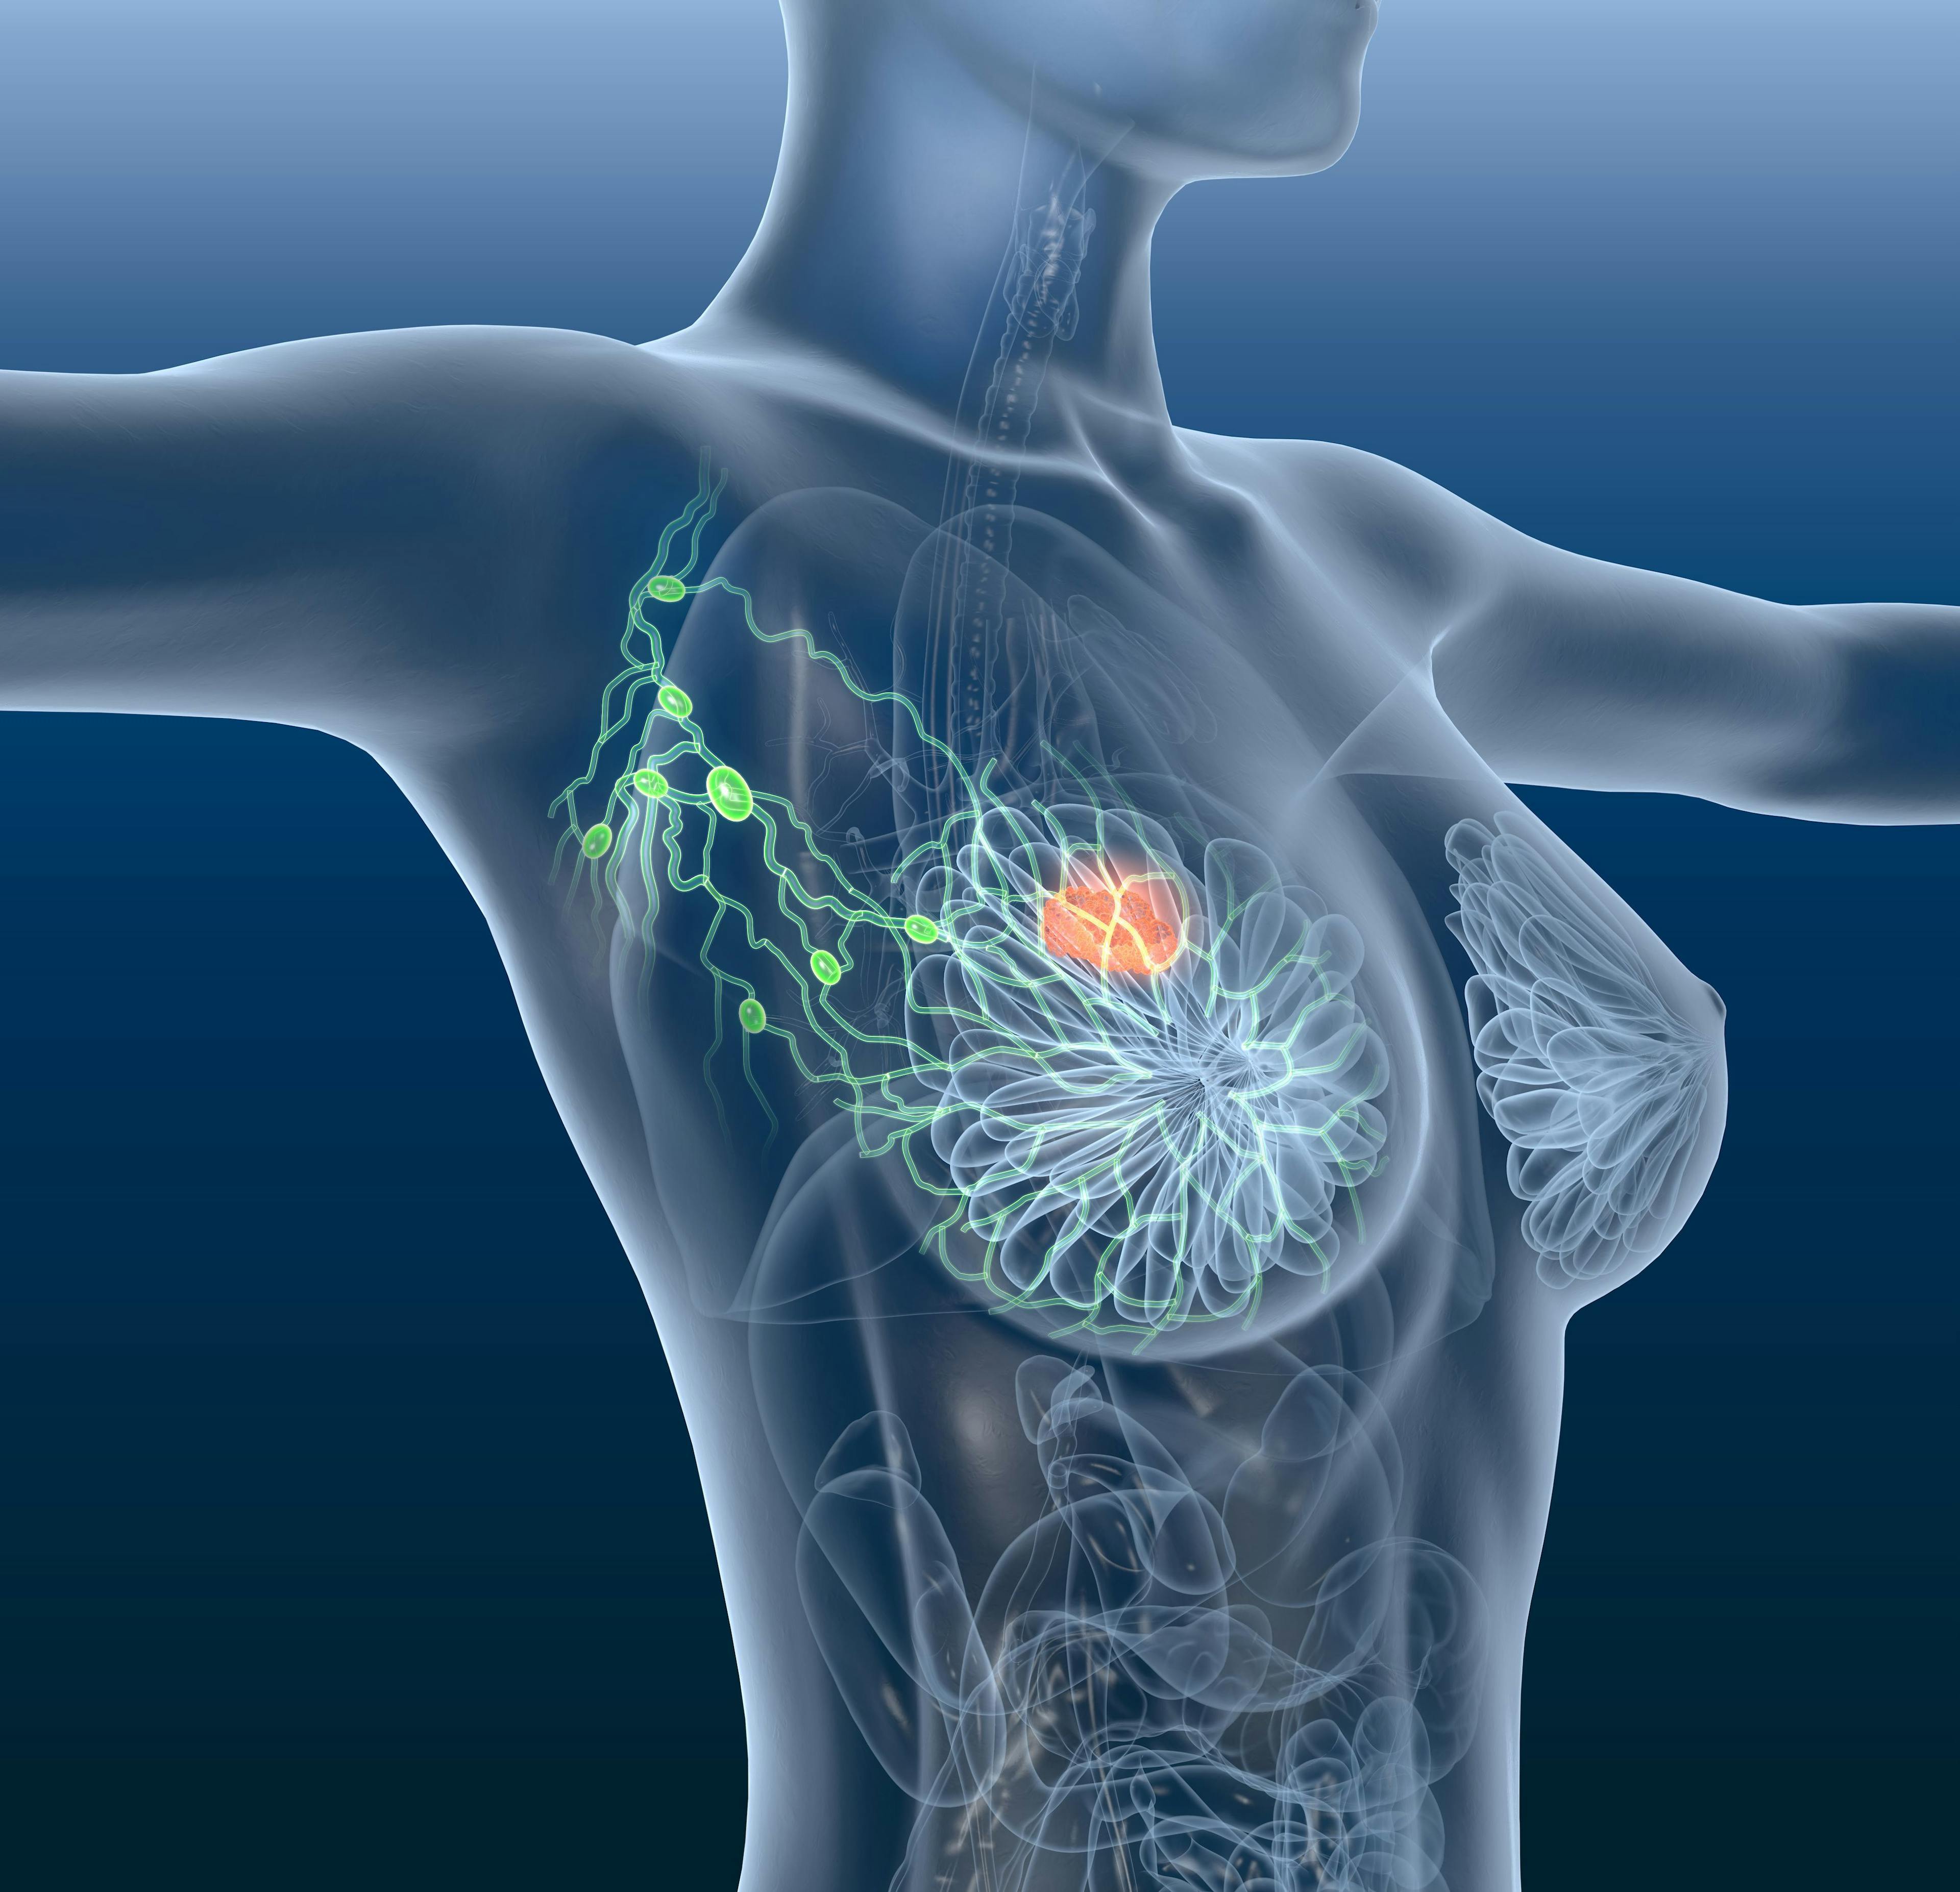 Elacestrant Improves Outcomes for Certain Patients With Breast Cancer